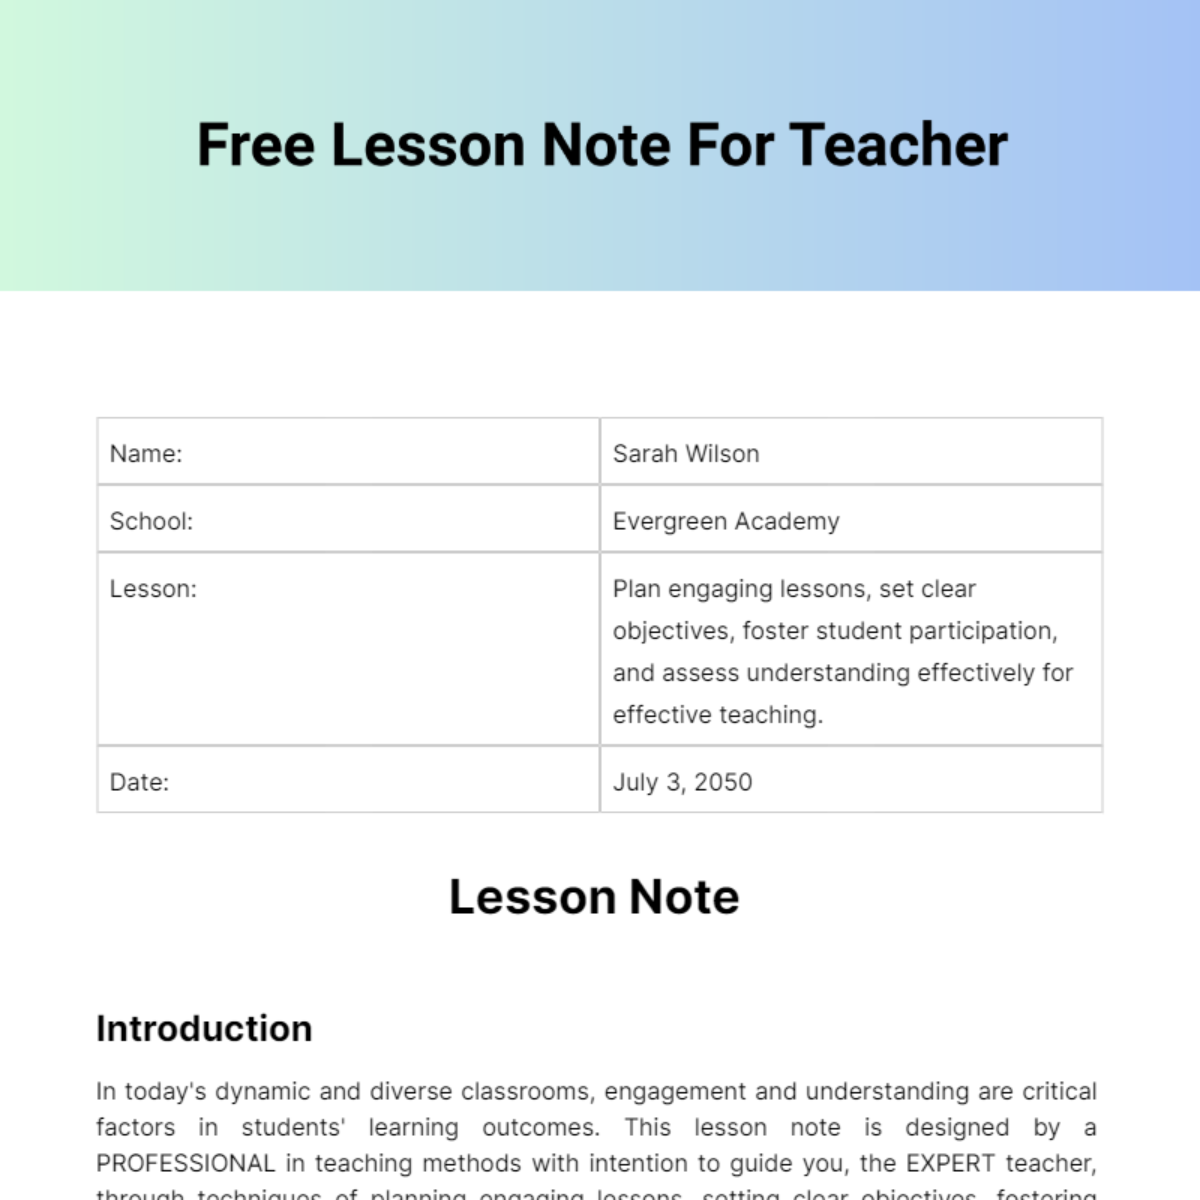 Free Lesson Note For Teacher Template